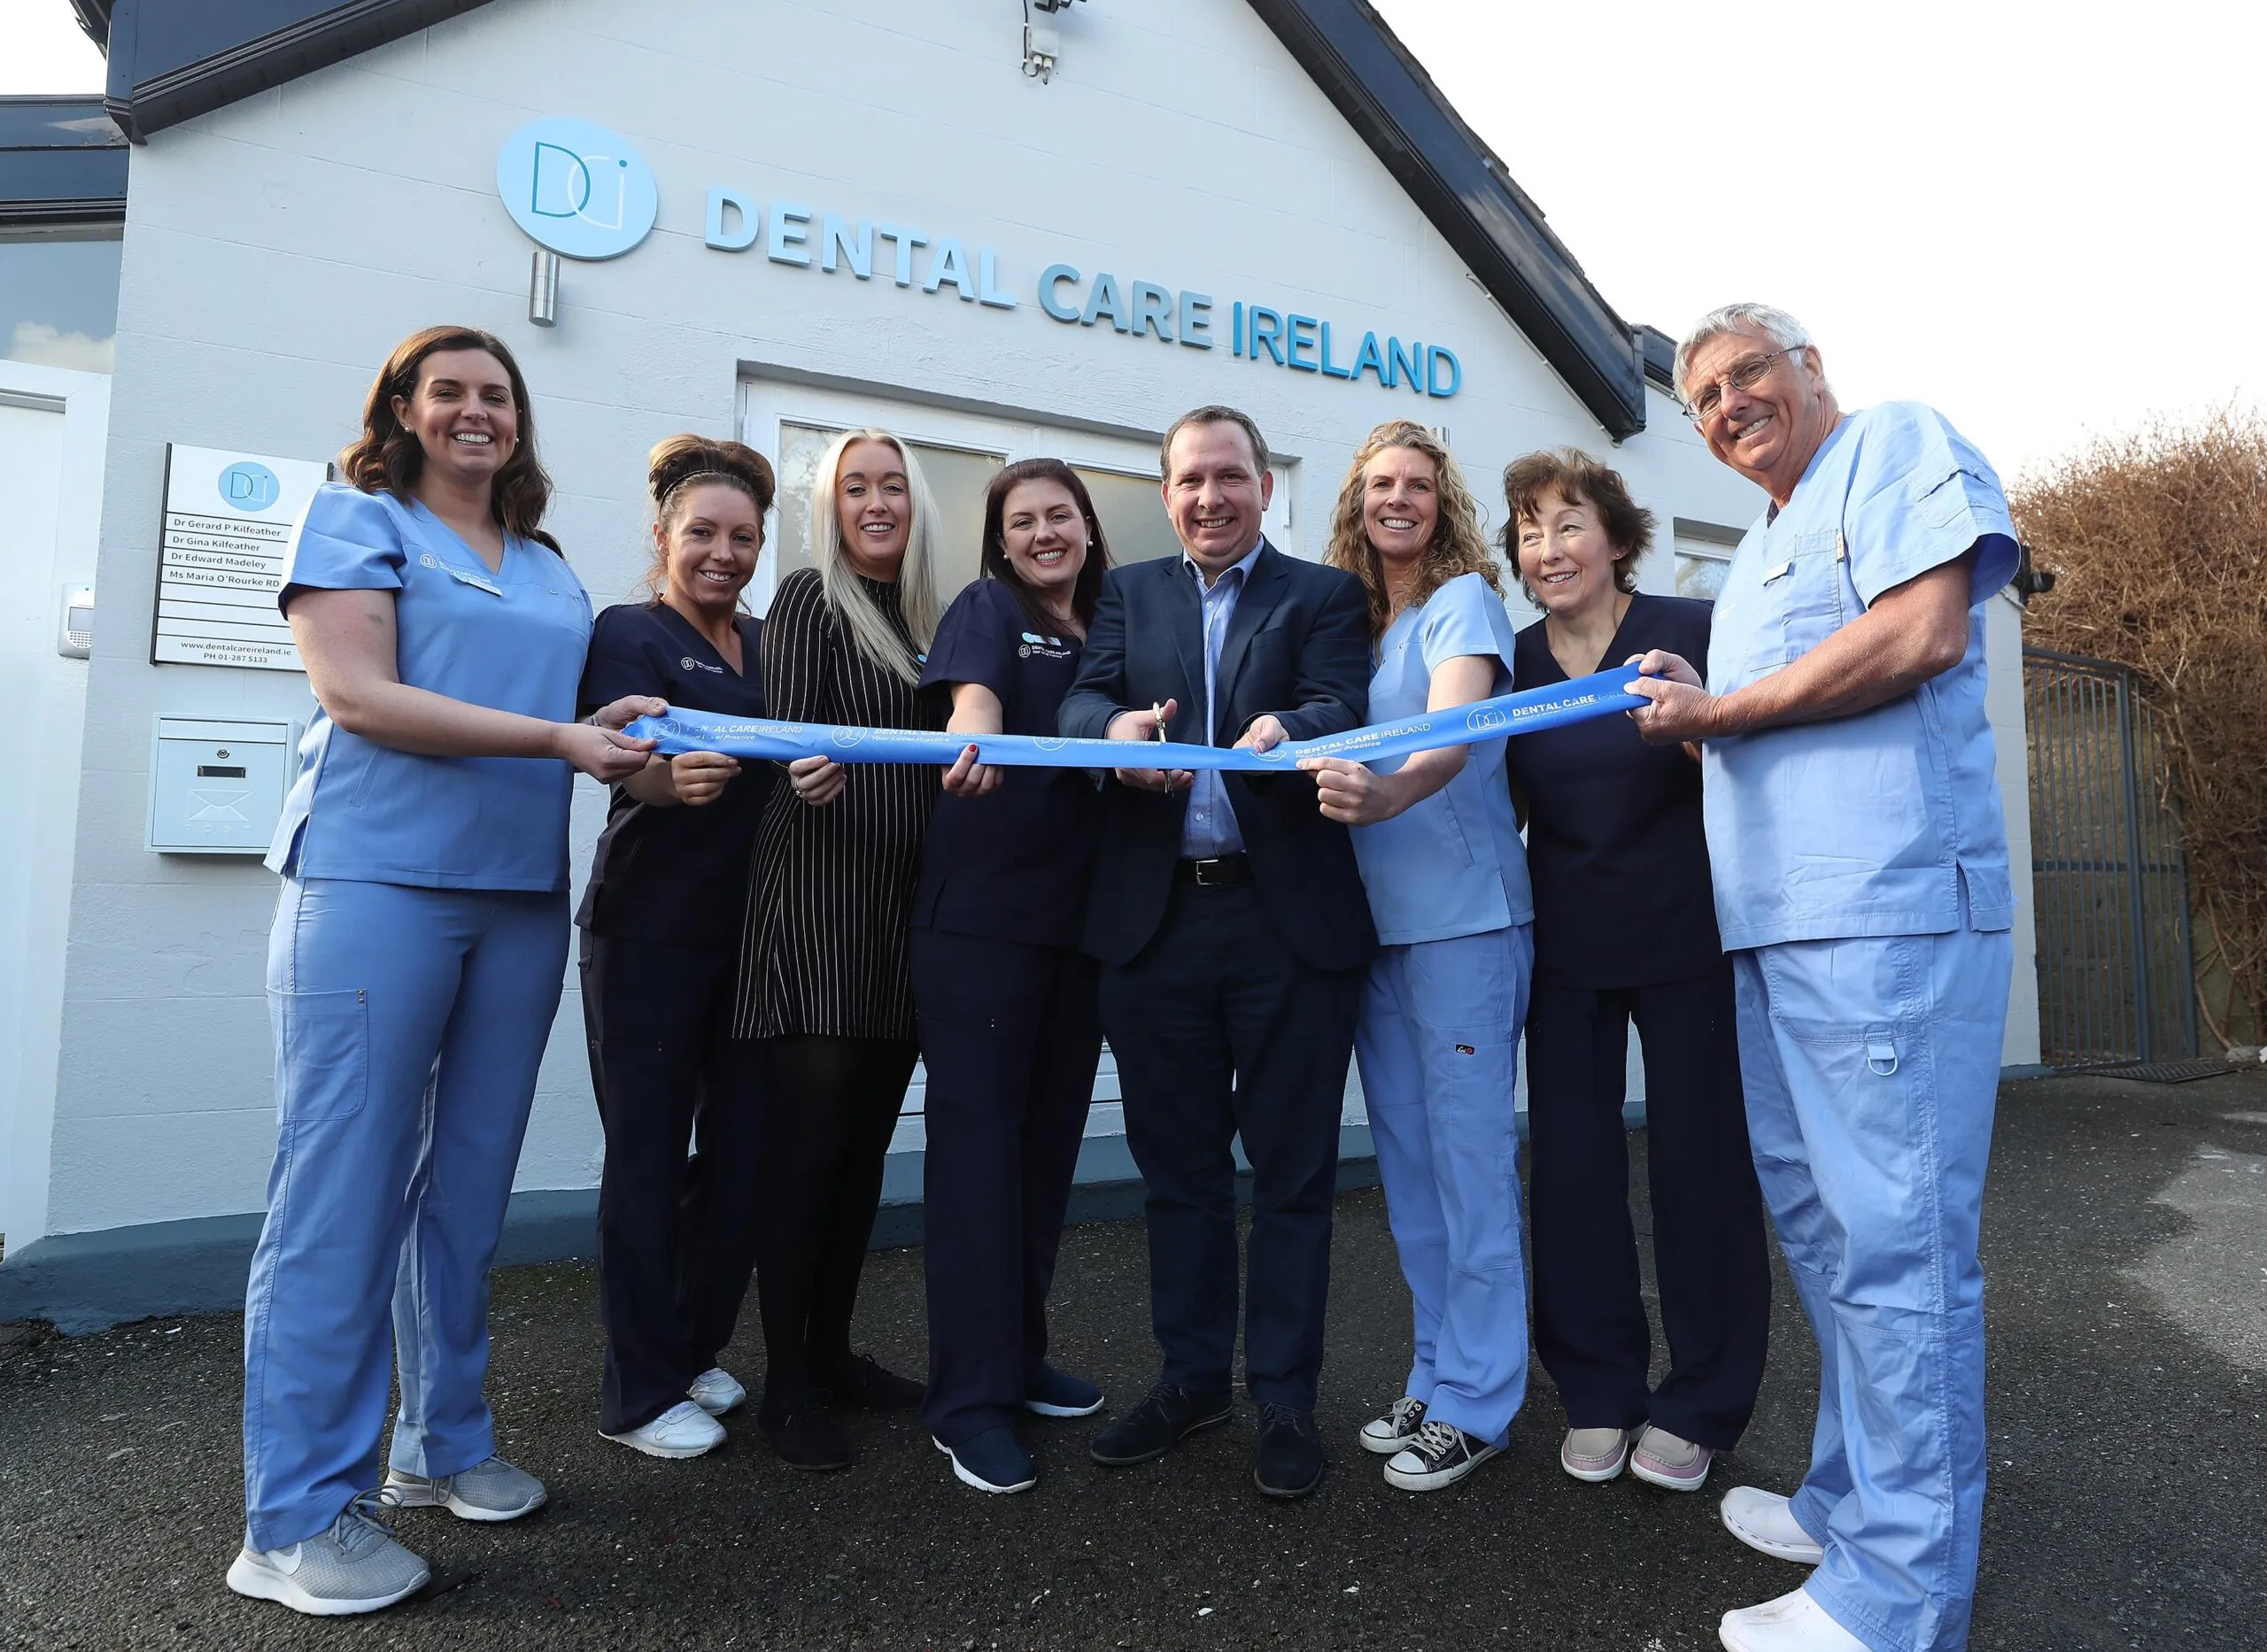 The brand-new Dental Care Ireland dentist in Greystones is located right in the heart of the bustling main street on Church Road.